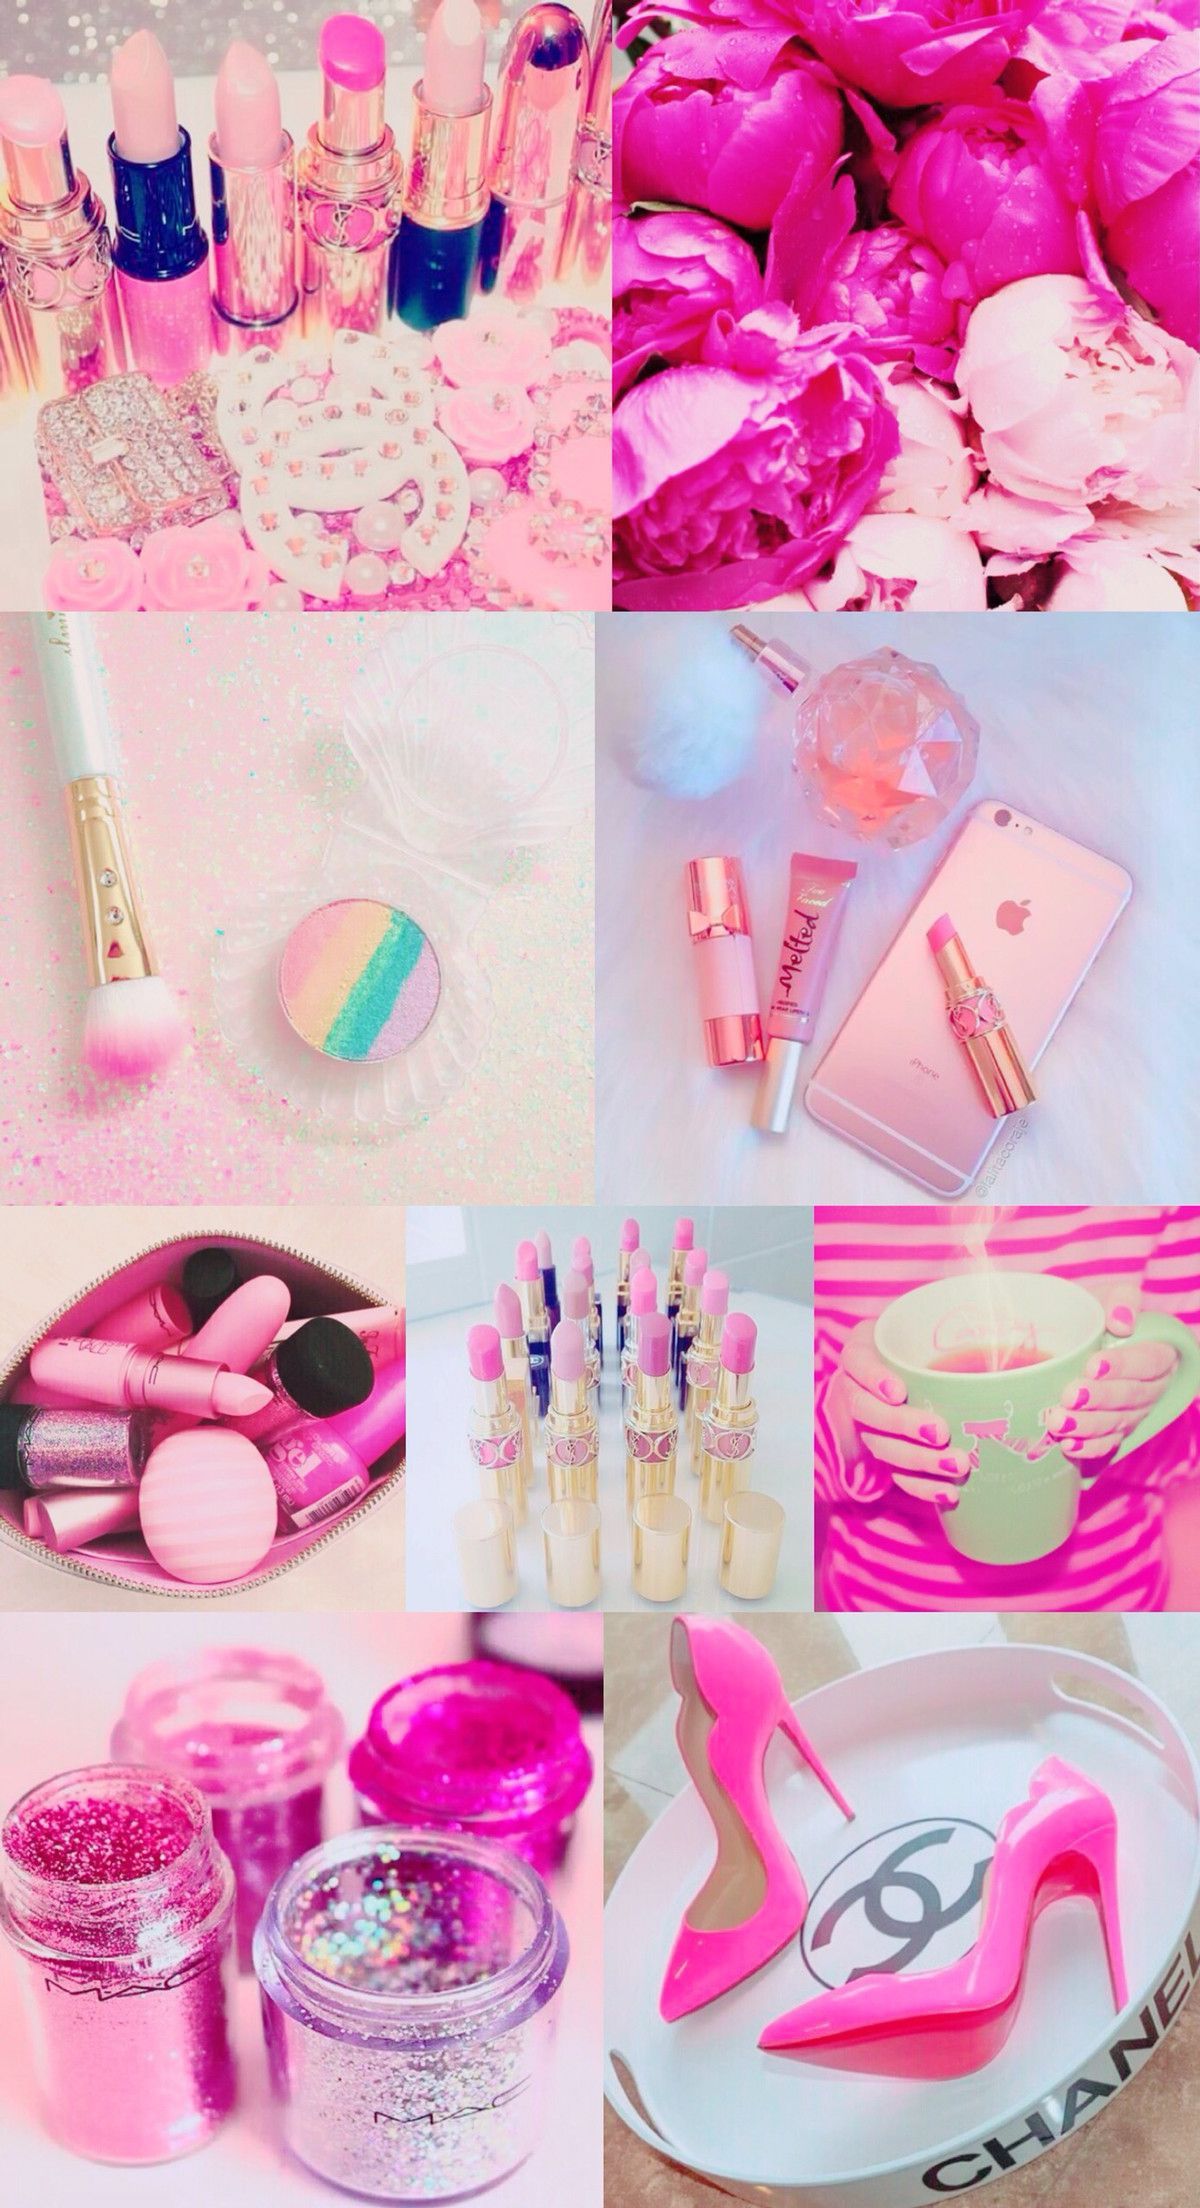 Cute Girly Wallpaper for iPhone - iPhone wallpaper girly, Pink wallpaper, Aesthetic pastel wallpaper